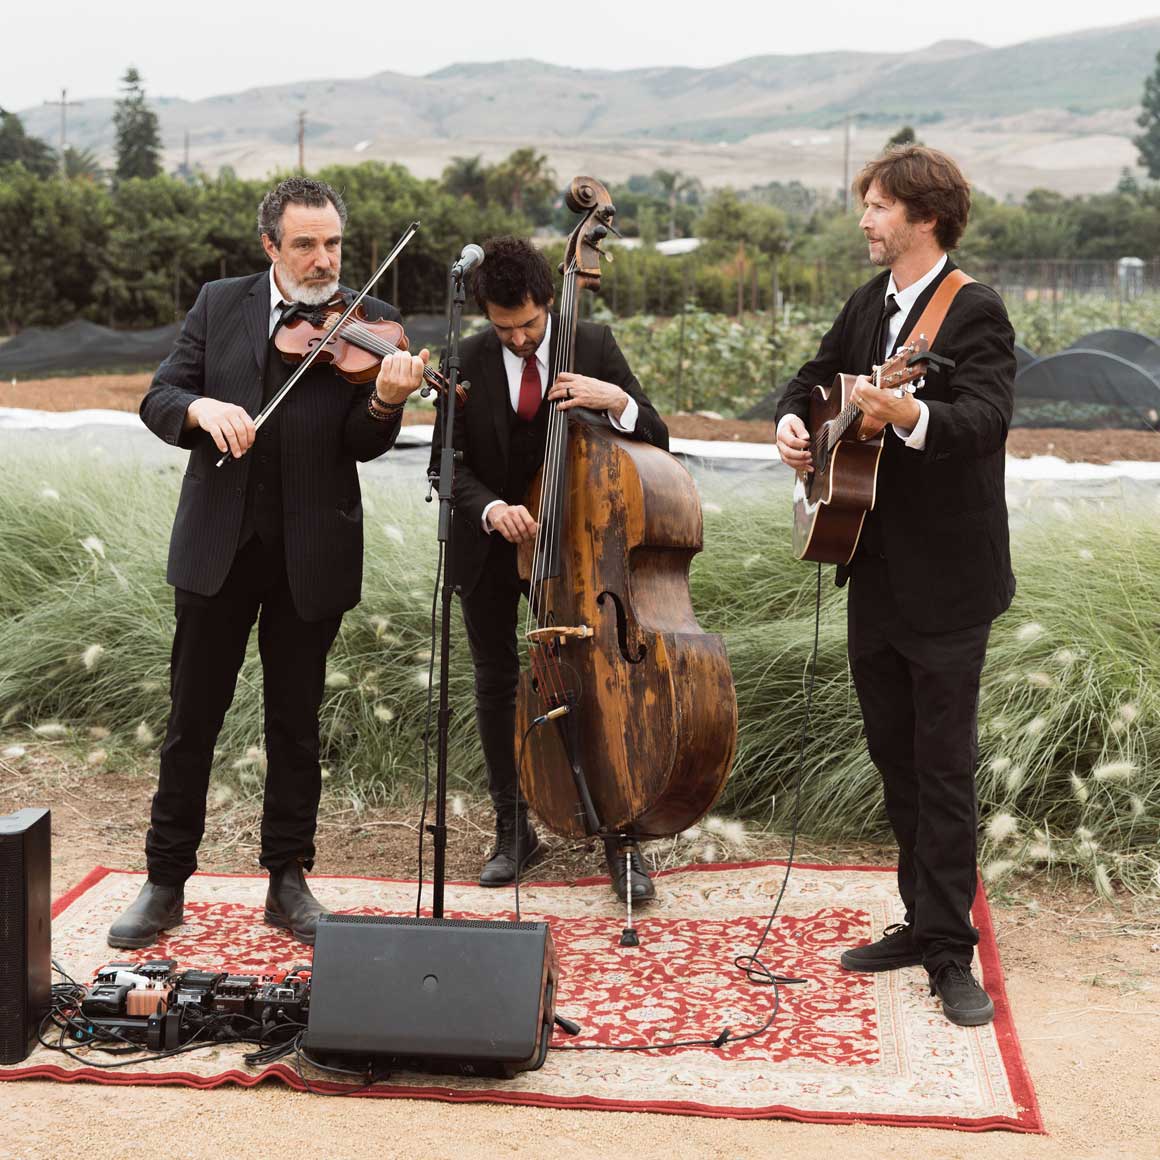 Three musicians in suits stand in the farm fields playing string instruments.